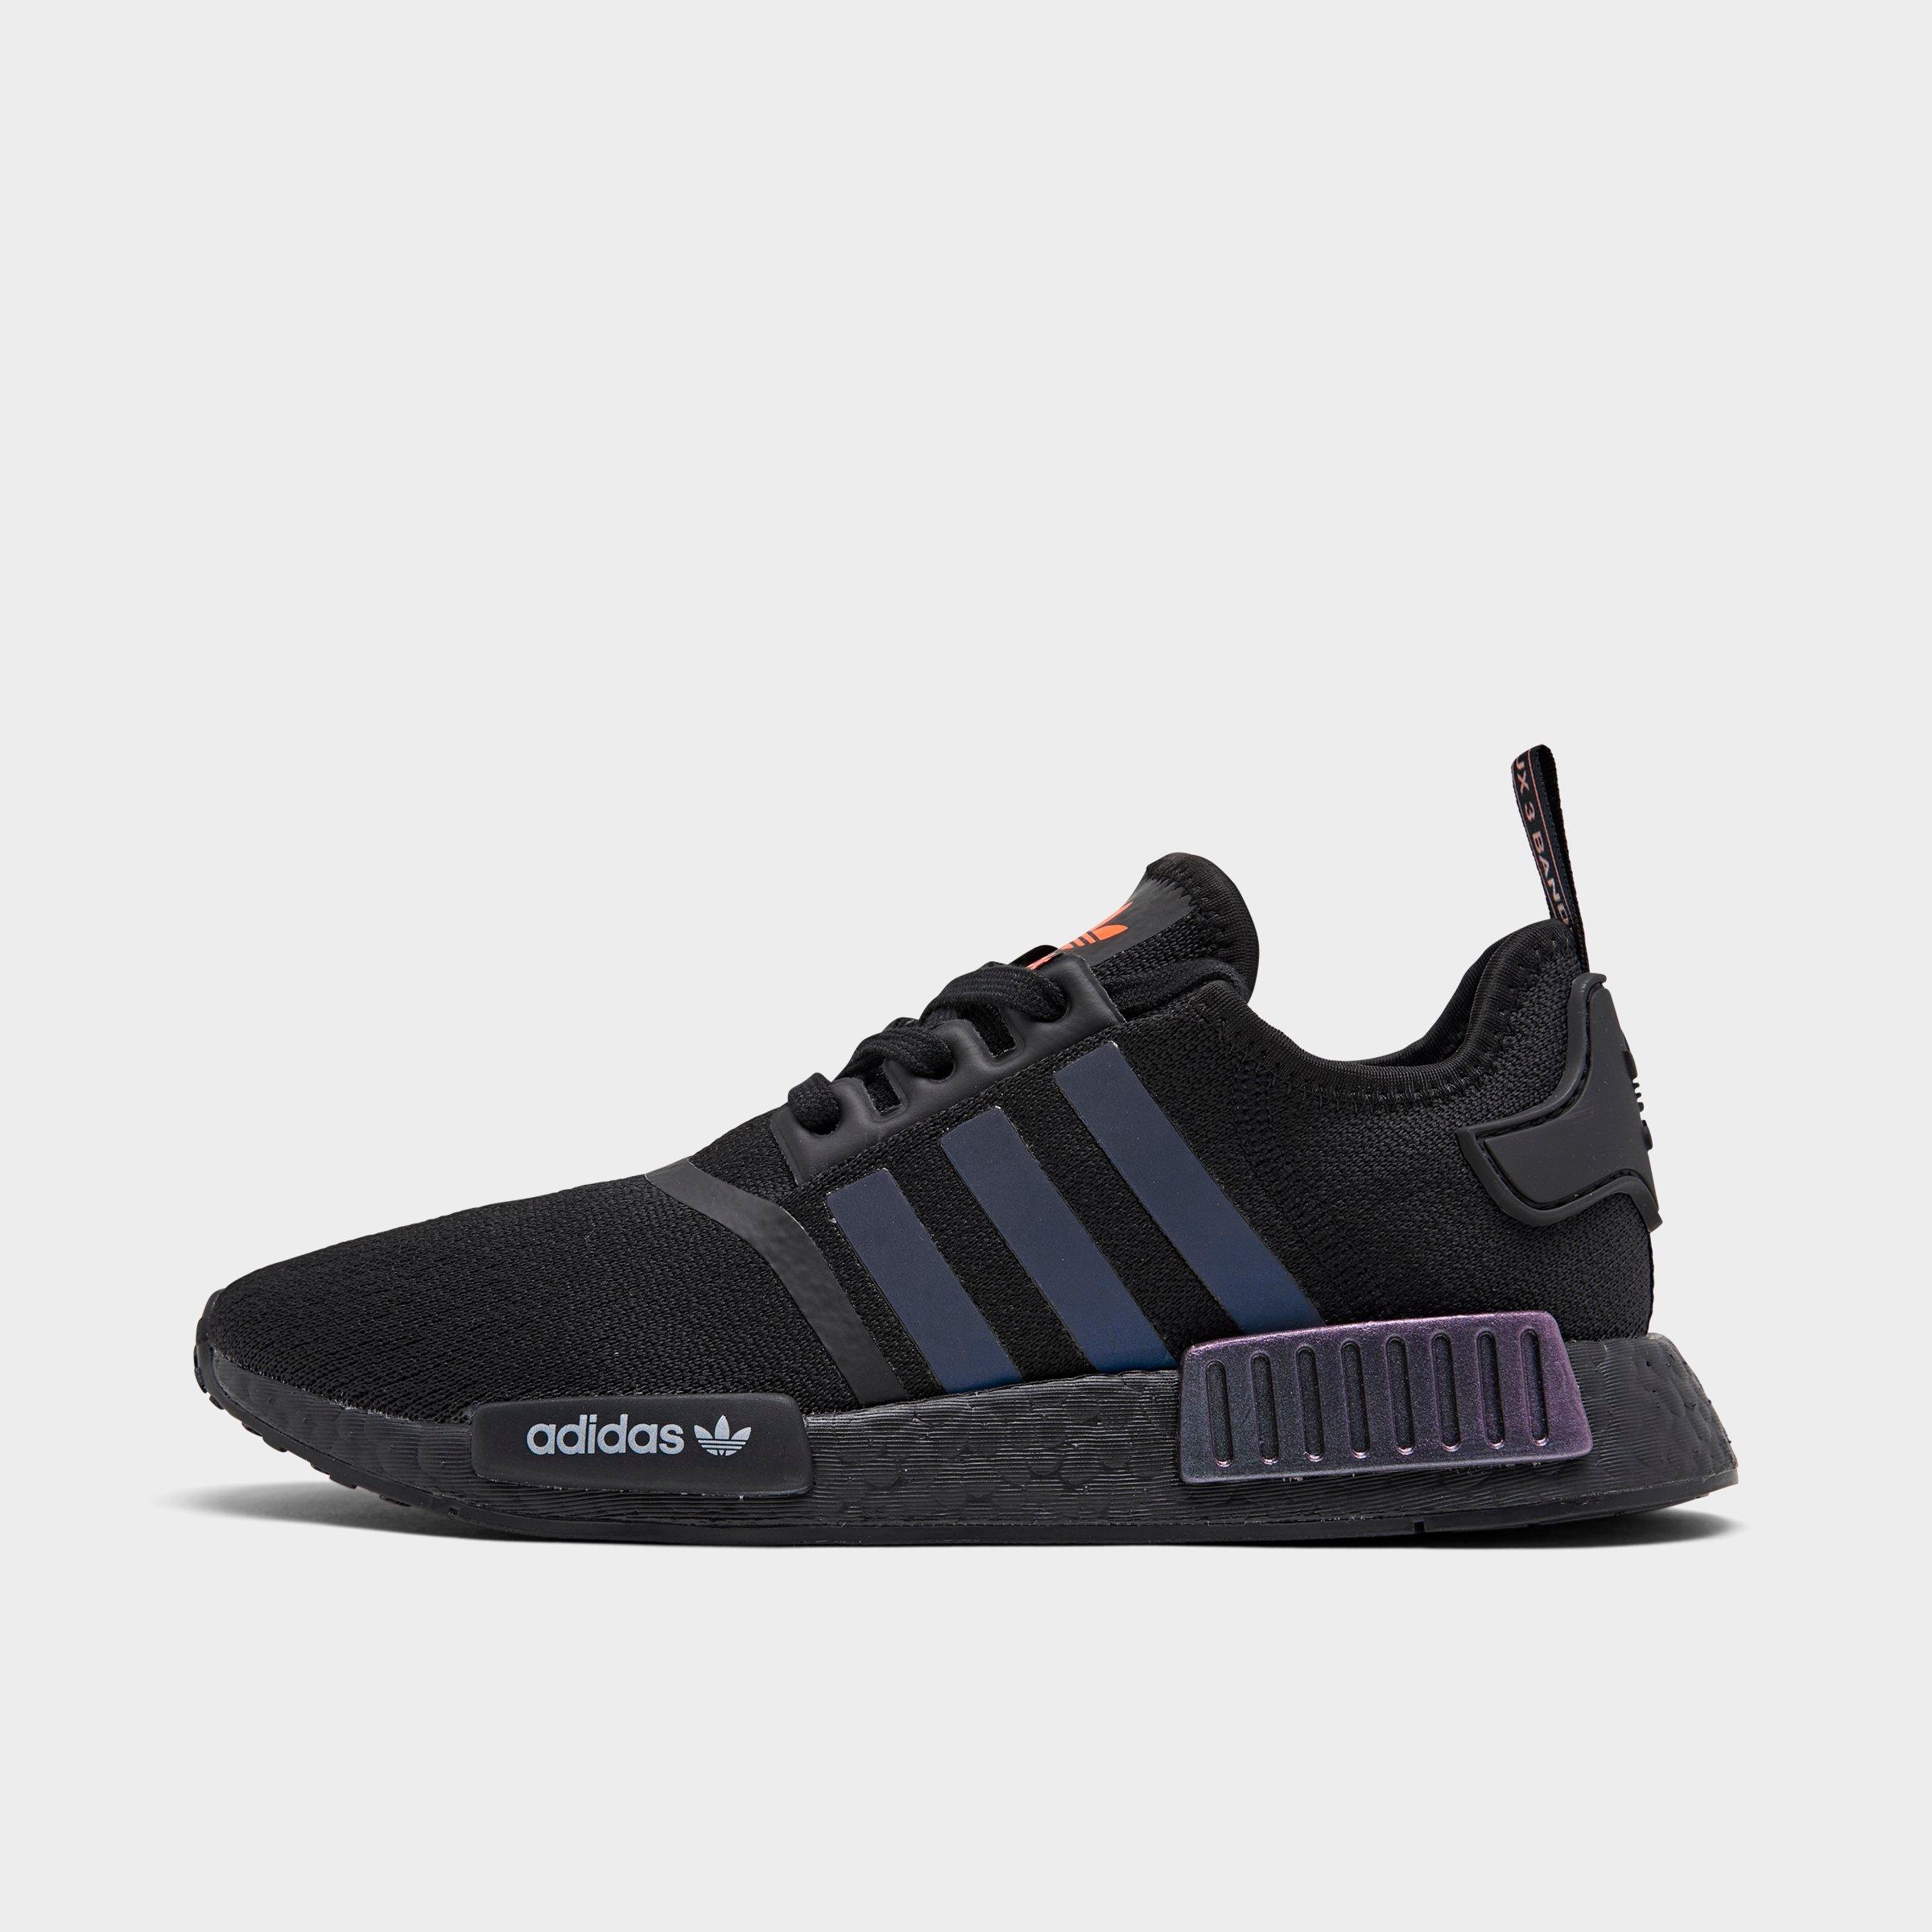 UPC 193106000859 product image for Adidas Men's NMD R1 Casual Shoes in Black Size 9.0 | upcitemdb.com